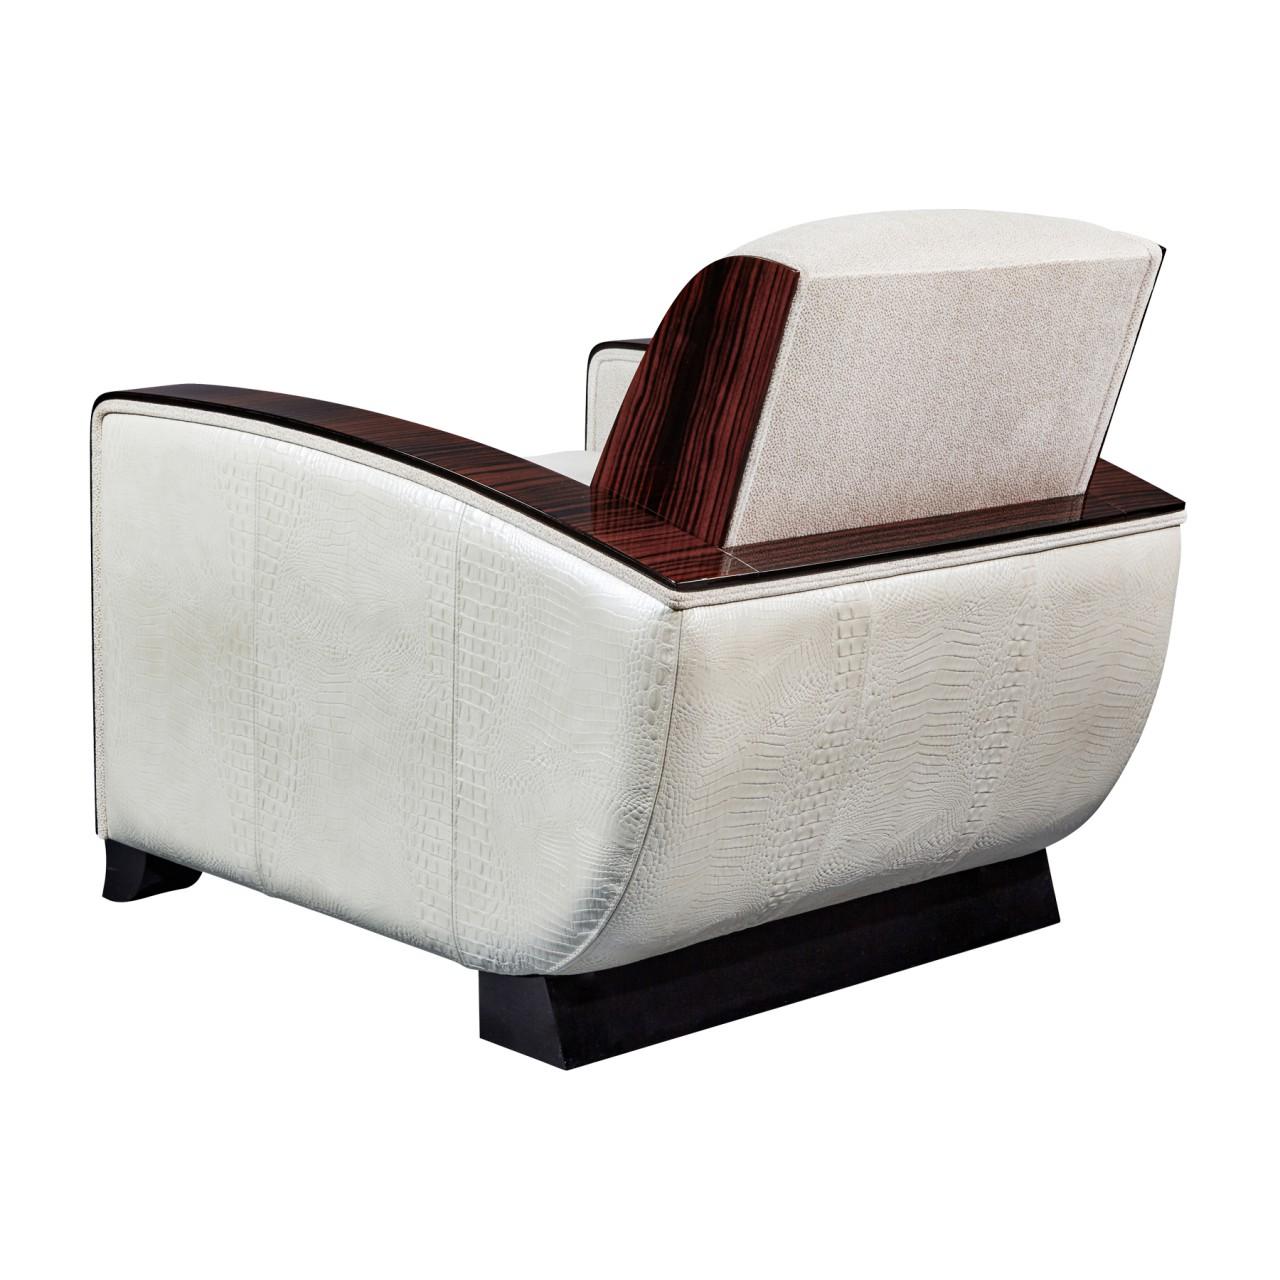 Classic Art Deco club chair. Finest Macassar ebony set off by off white upholstery in Dedar textile 